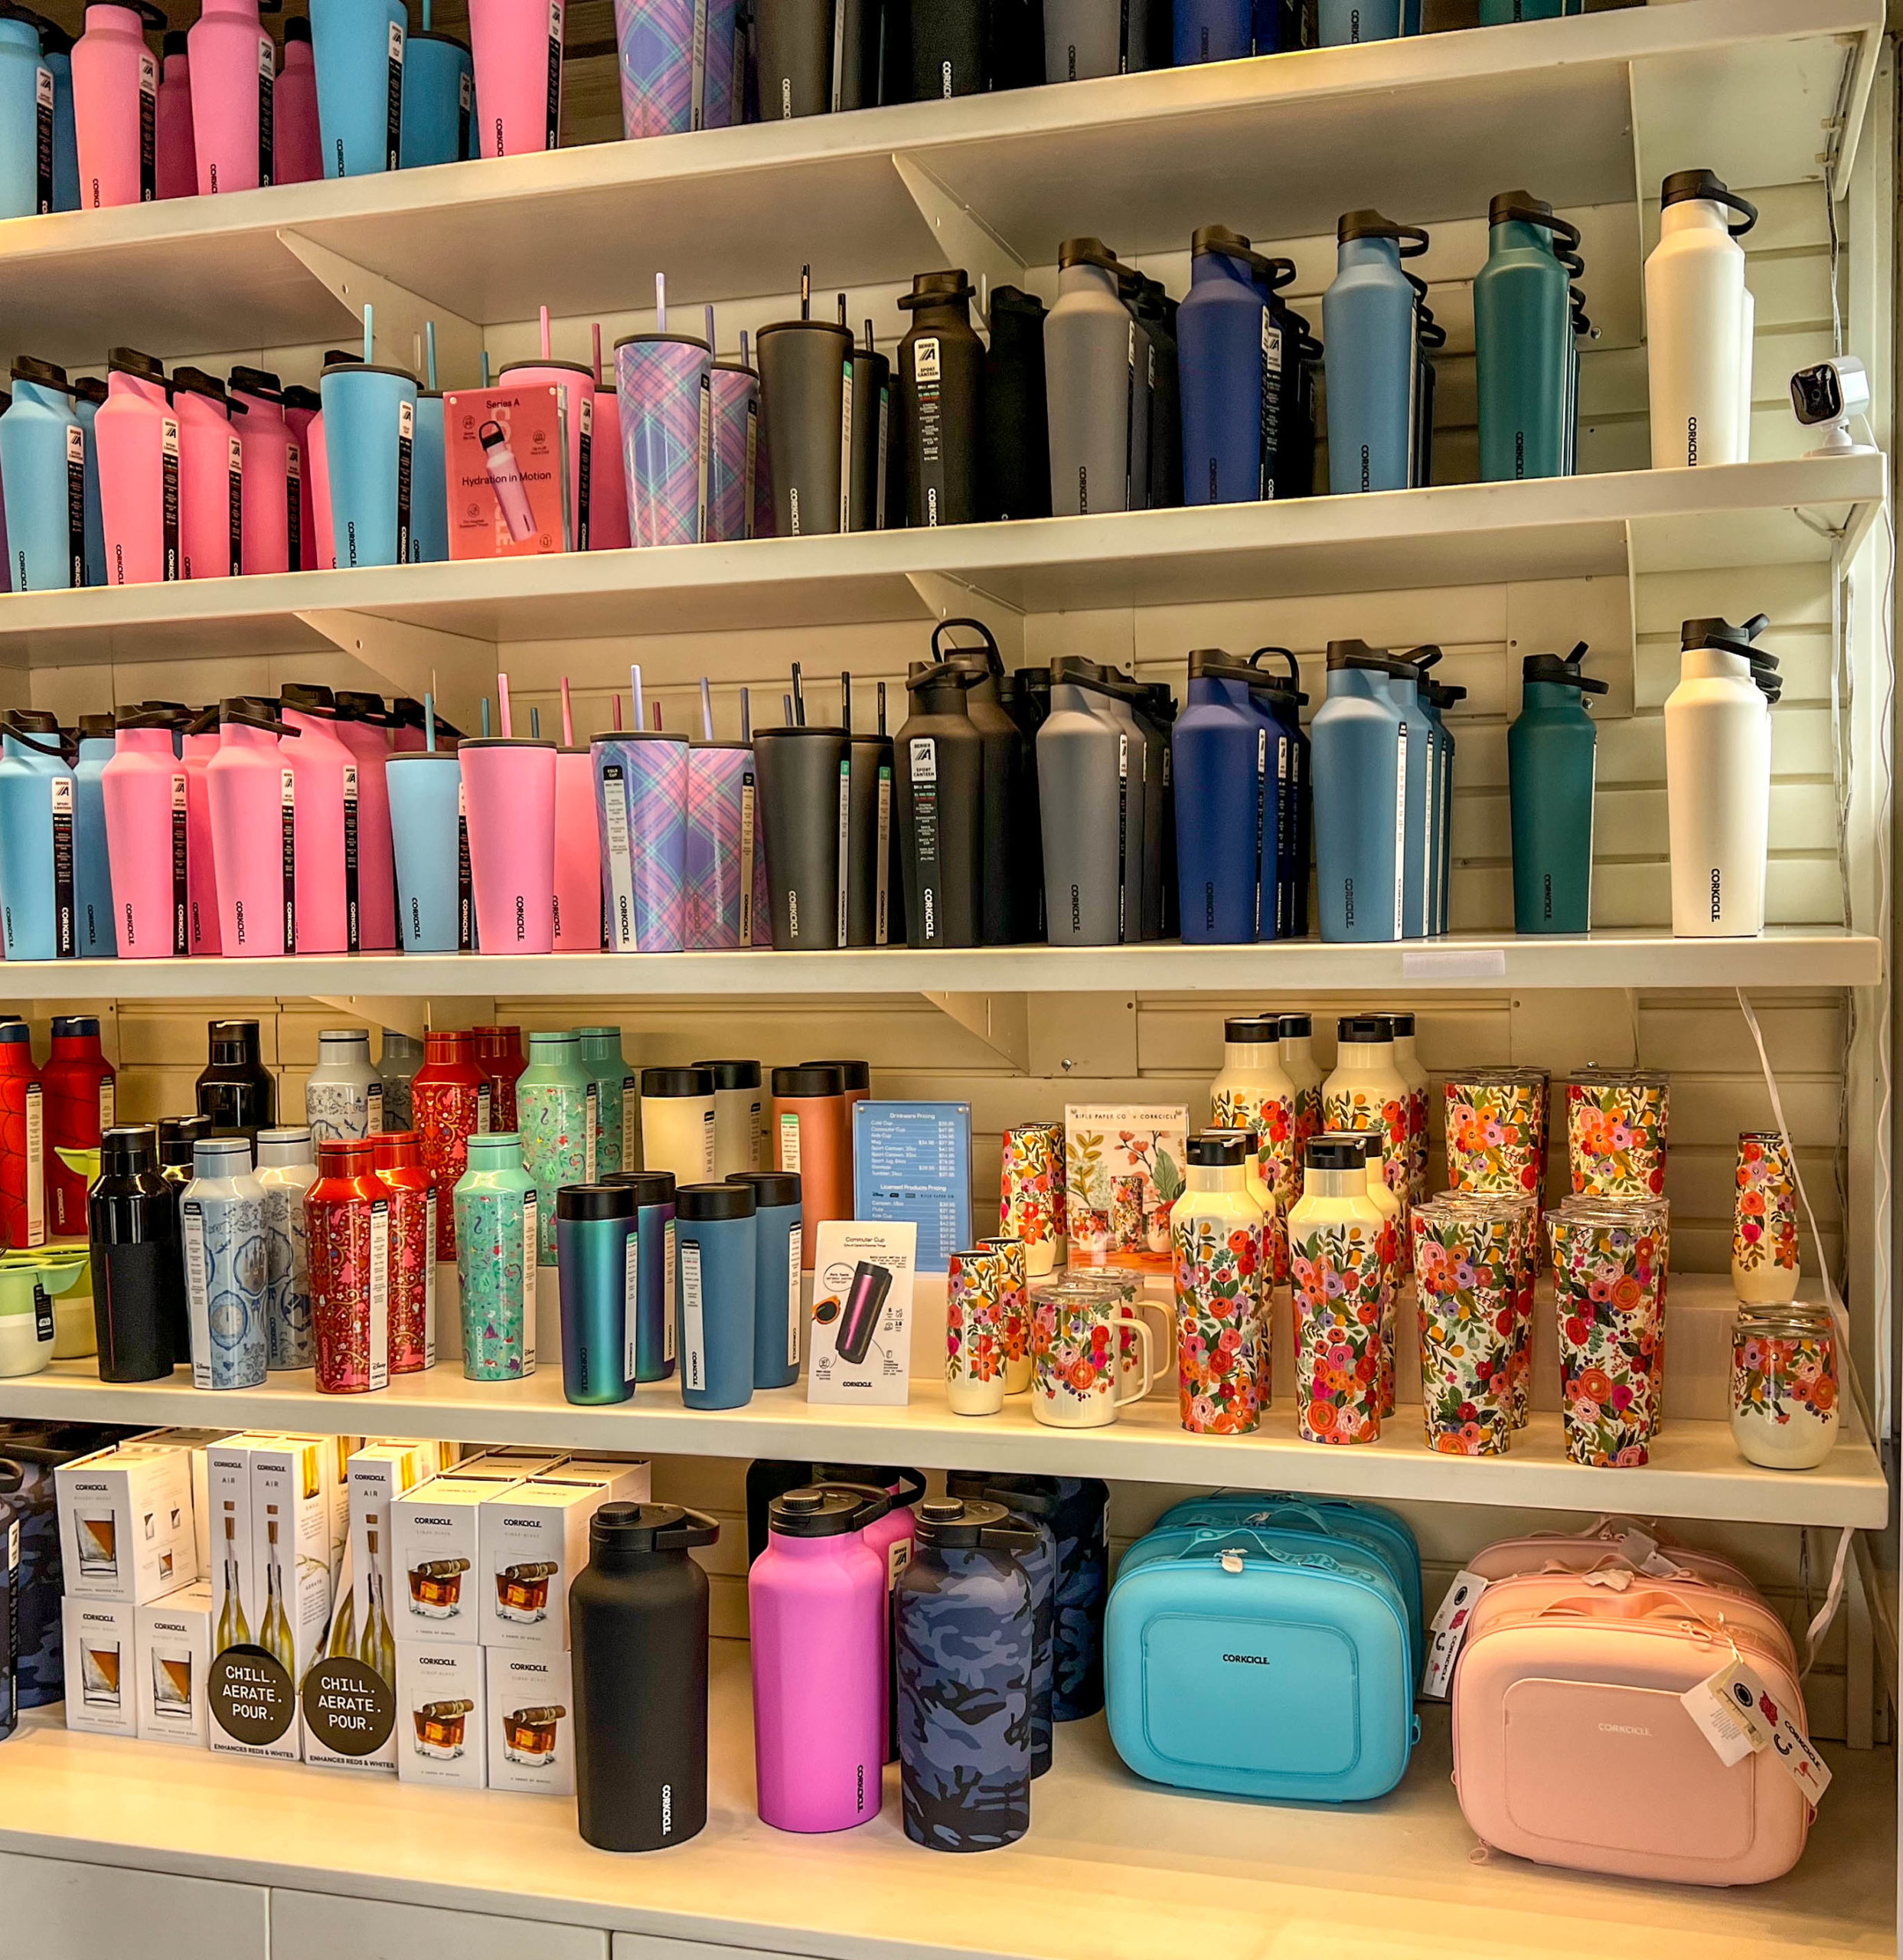 New Corkcicle Store Opens in Disney Springs (Plus a Giveaway!)